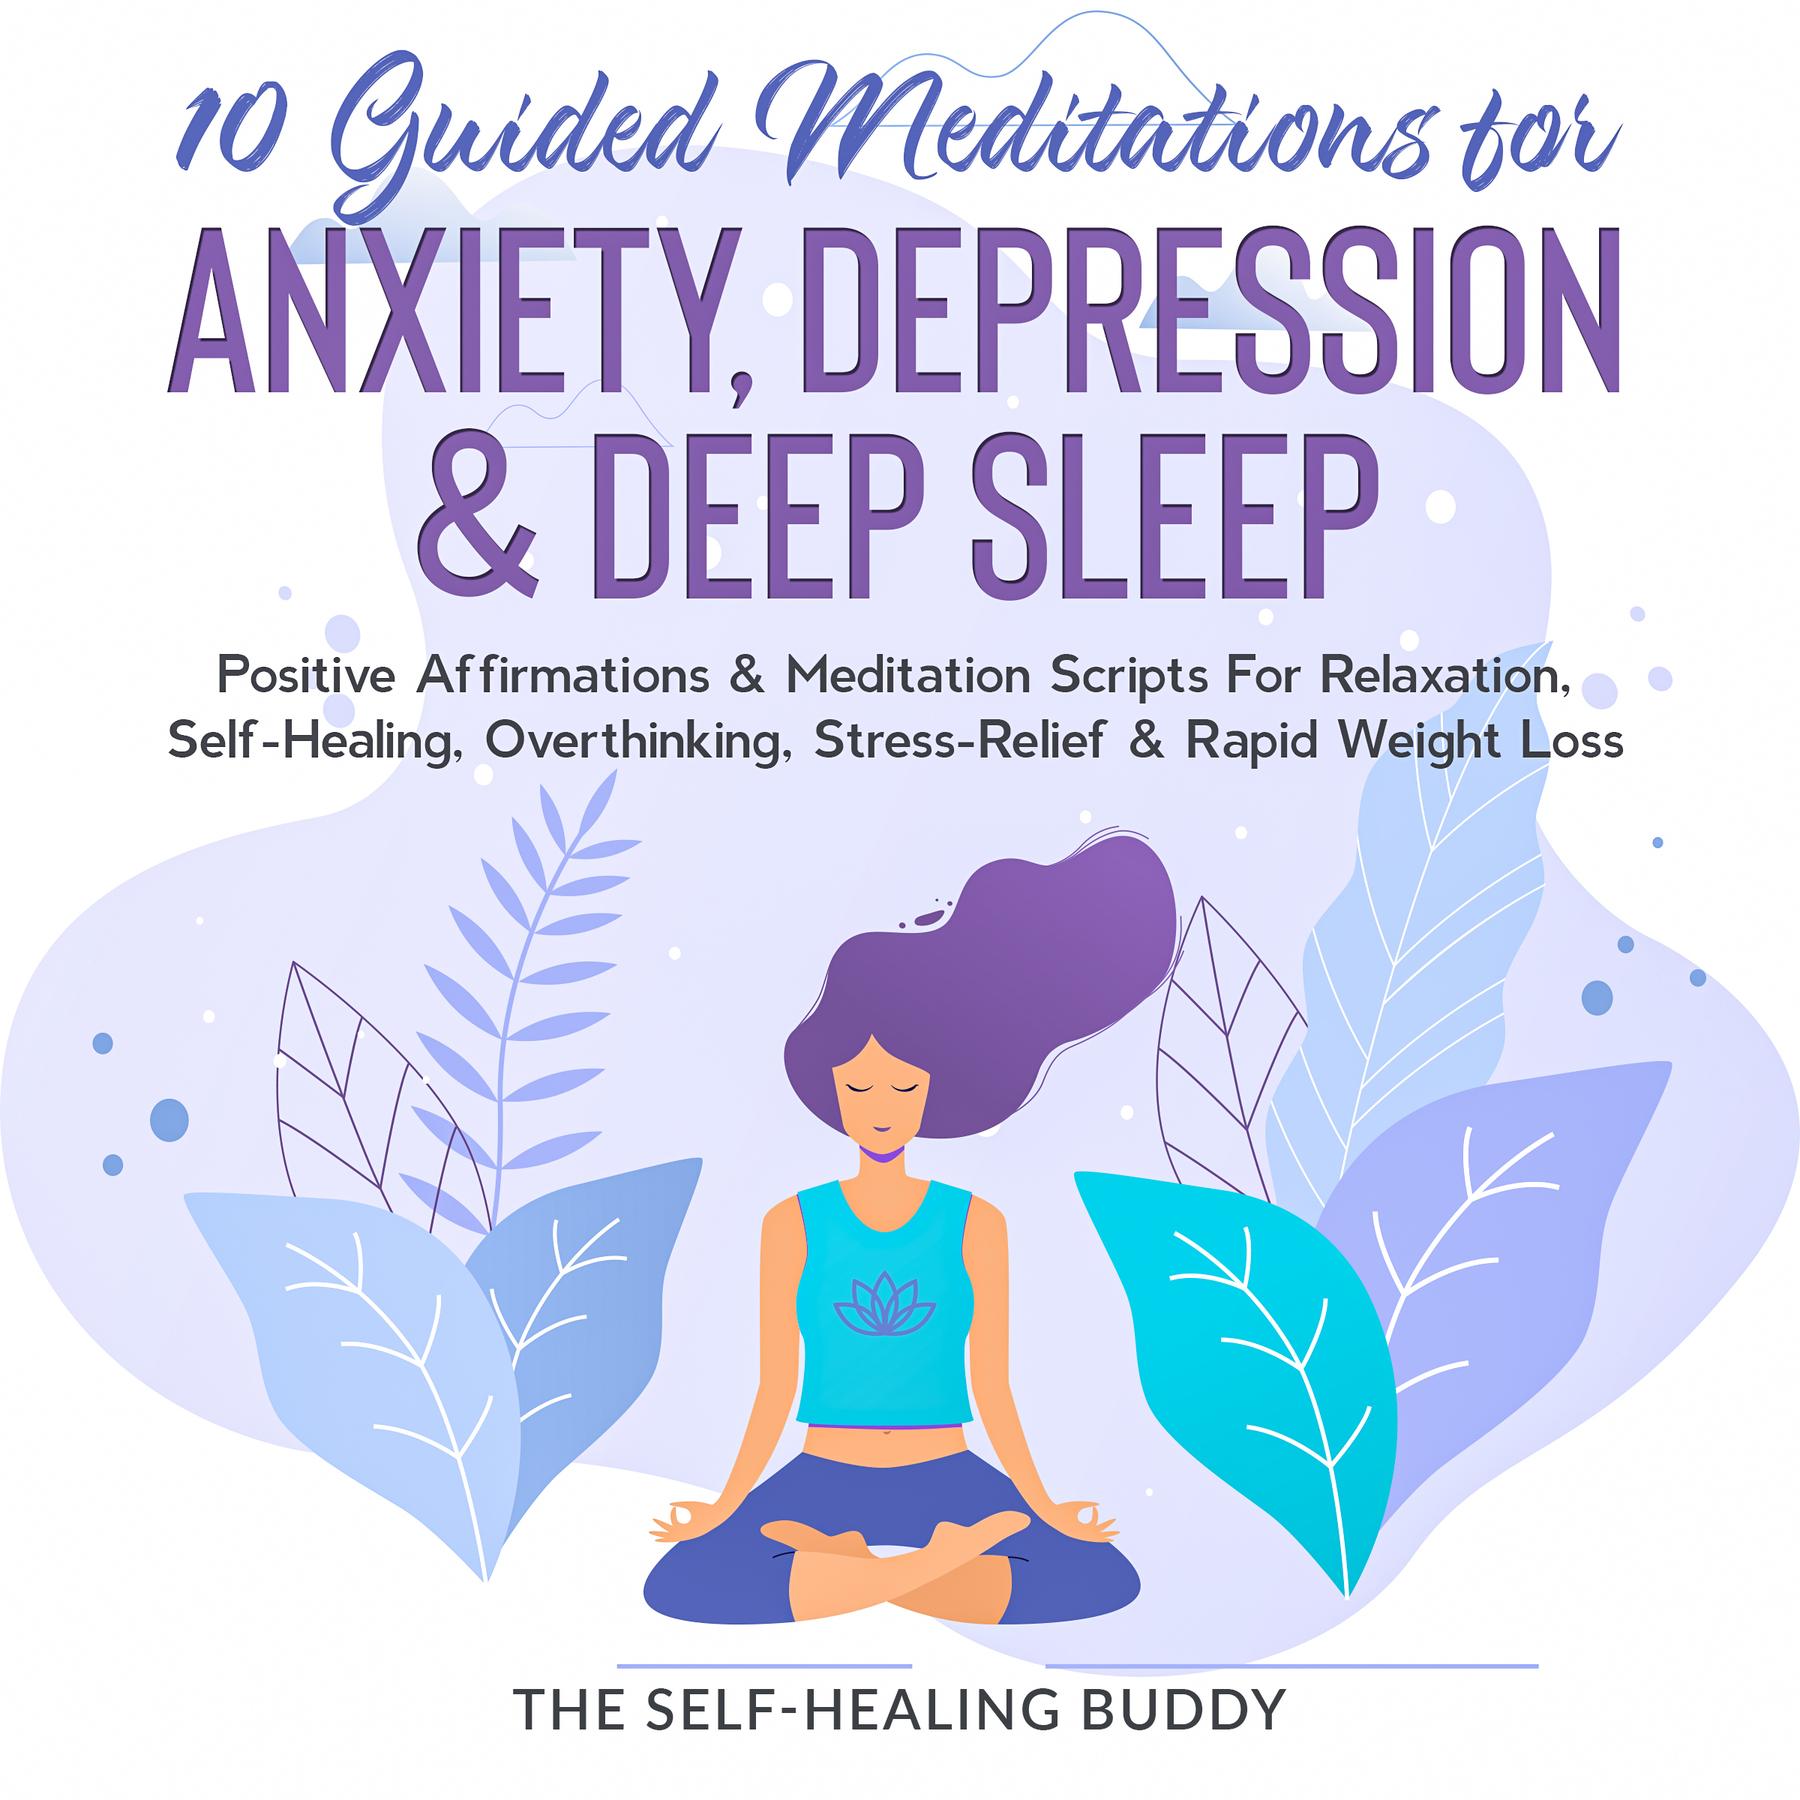 Umschlagbild für 10 Guided Meditations For Anxiety, Depression & Deep Sleep [electronic resource] : Positive Affirmations & Meditation Scripts For Relaxation, Self-Healing, Overthinking, Stress-Relief & Rapid Weight Loss